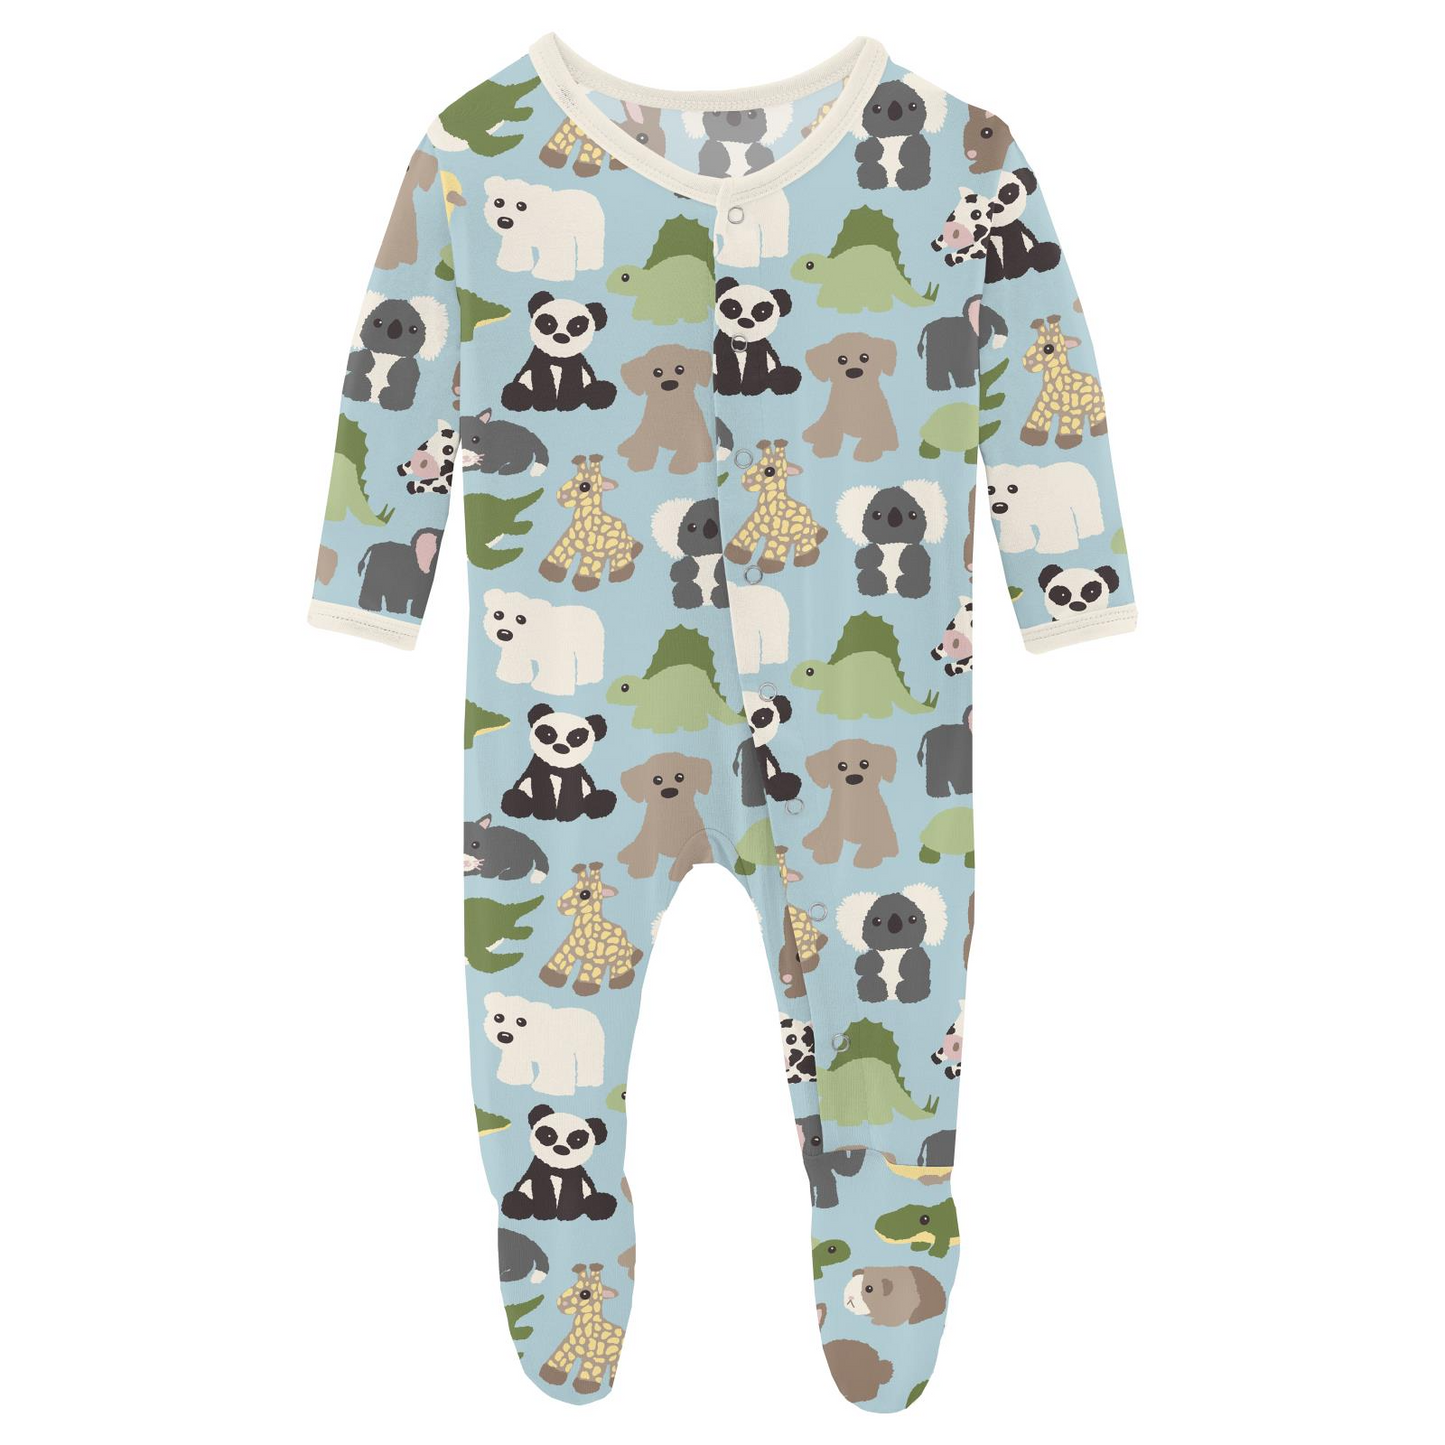 Kickee Pants Print Footie with Snaps: Spring Sky Too Many Stuffies